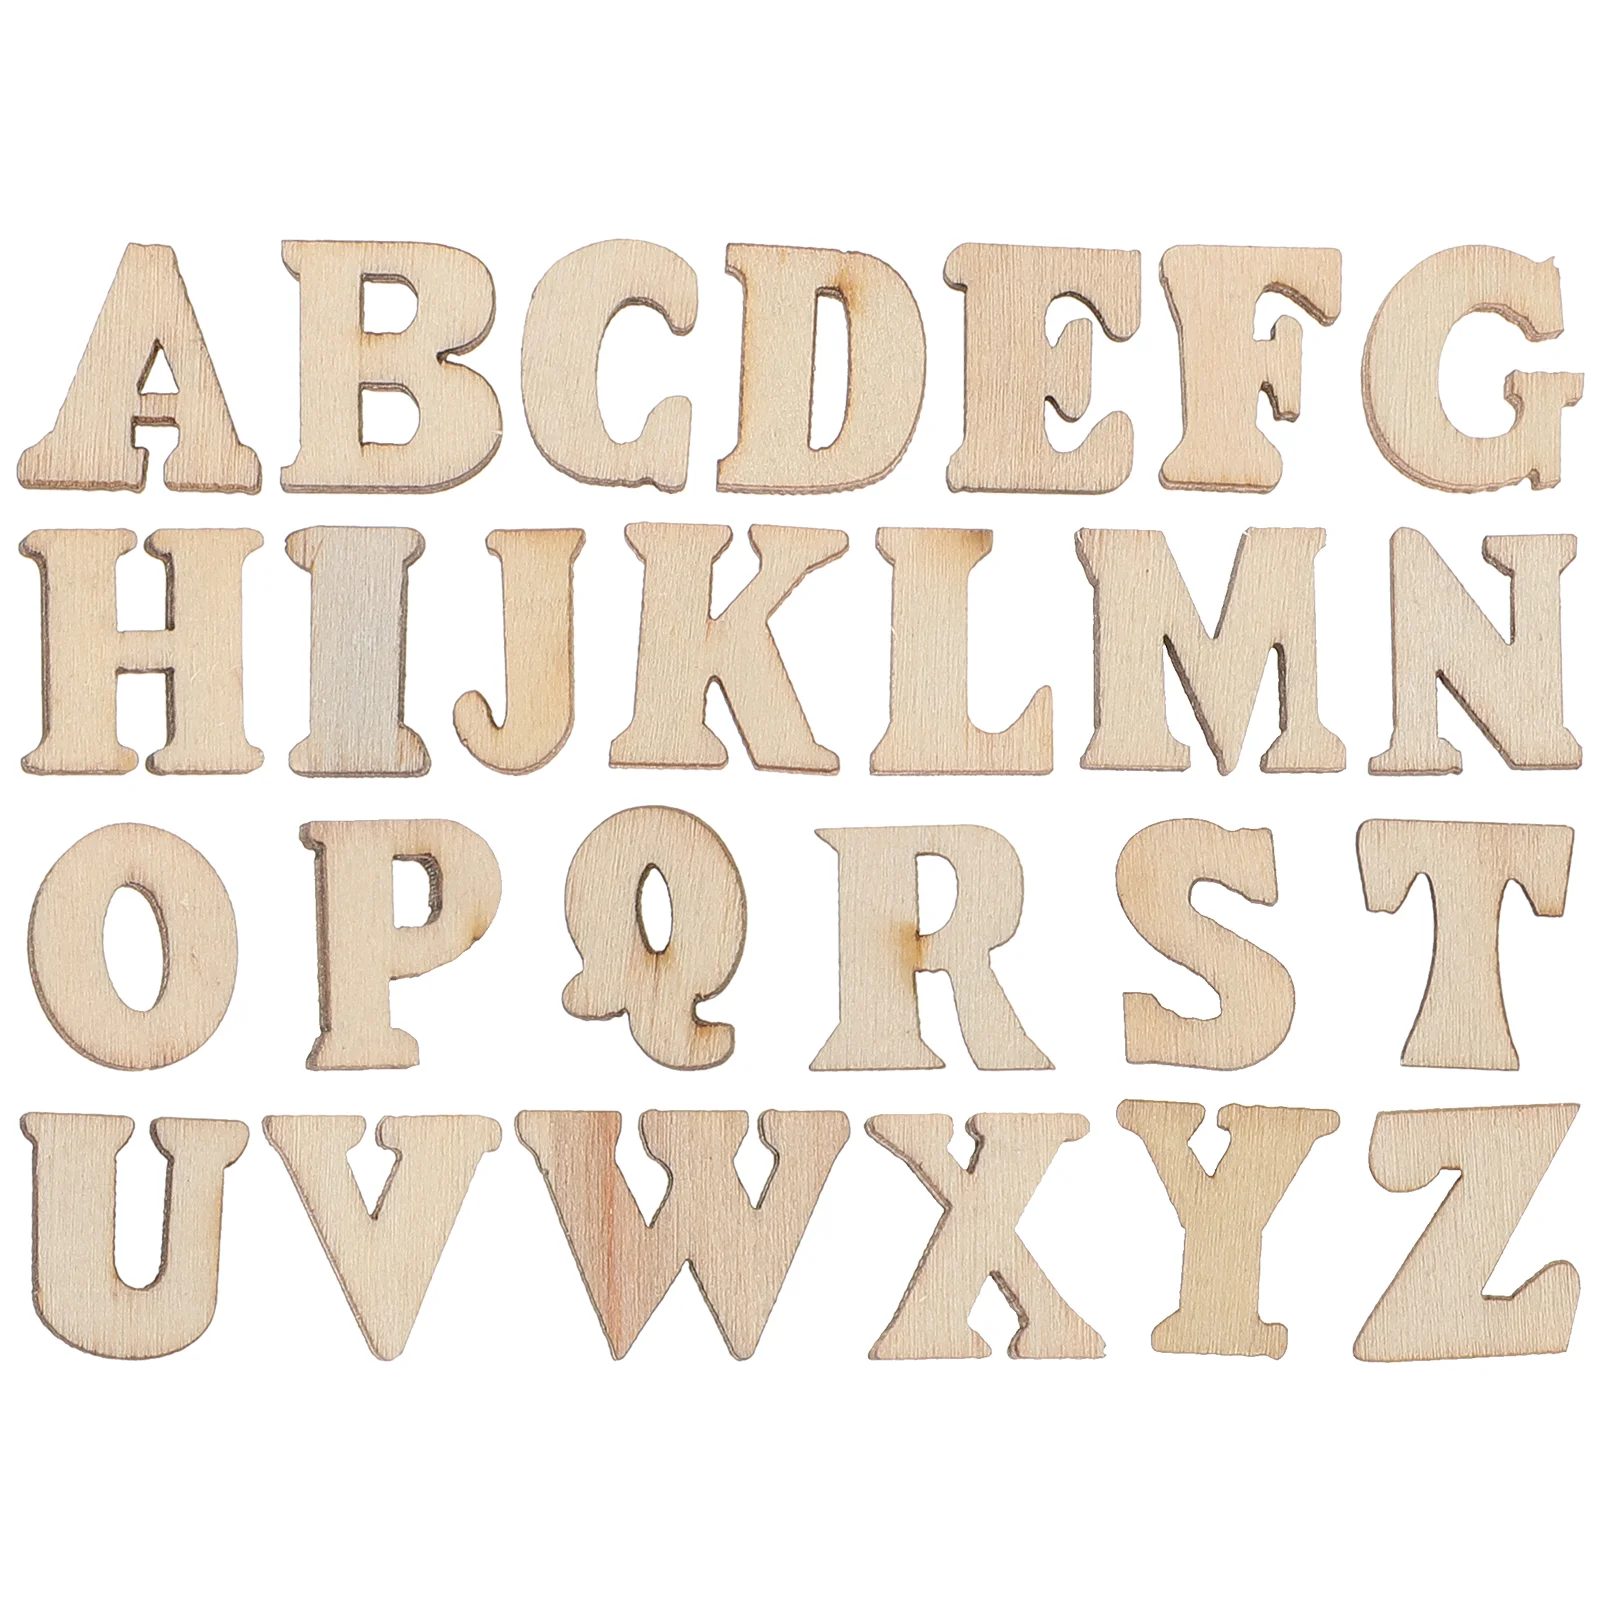 

Wooden Letters Wood Slice Crafts Craft Alphabet Letter Embellishments Unfinished Christmas Diy Material Mini Decor Cutouts